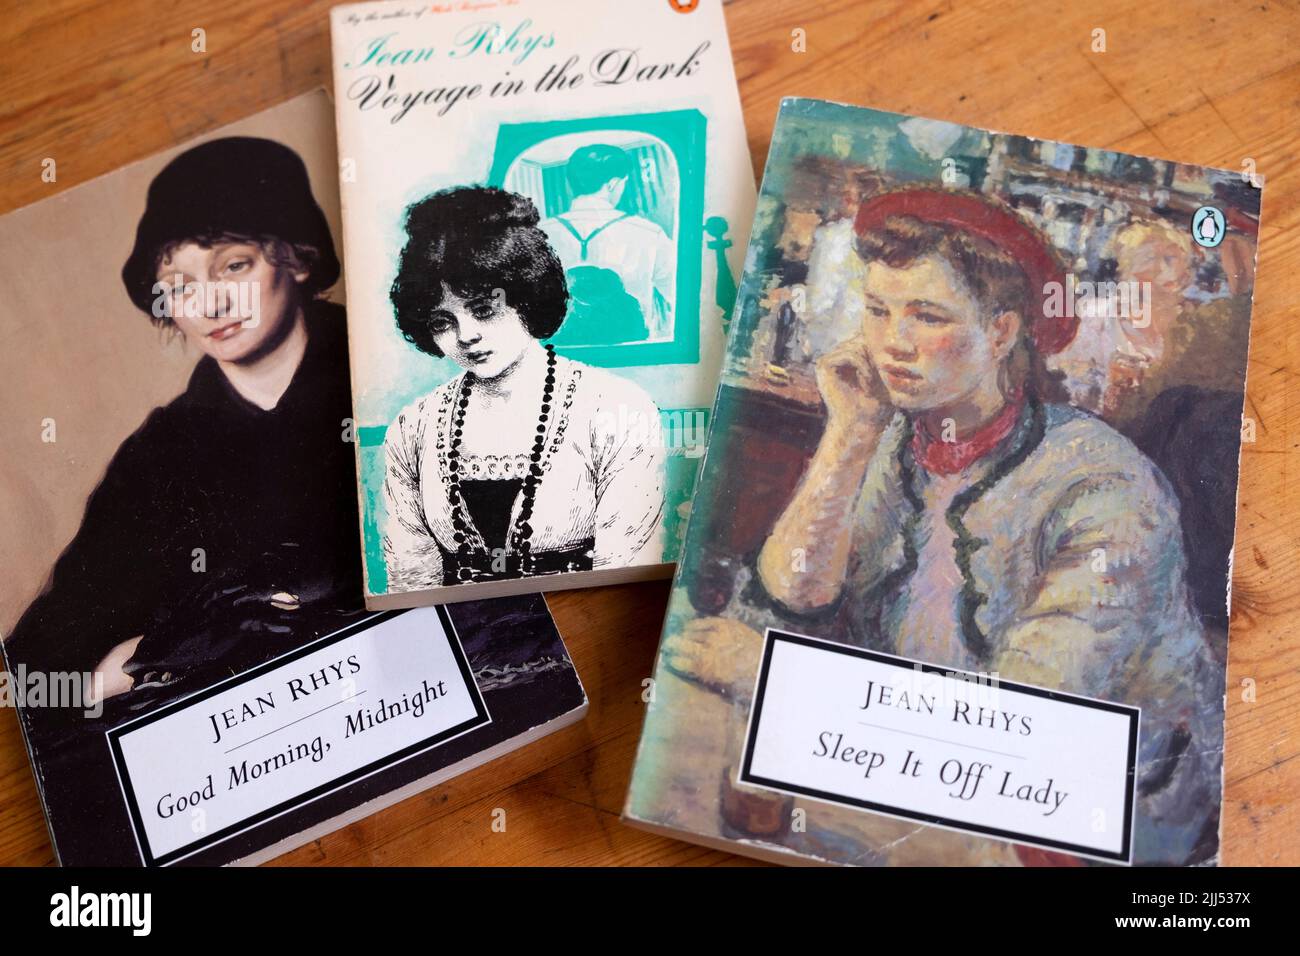 Jean Rhys book cover Stock Photo